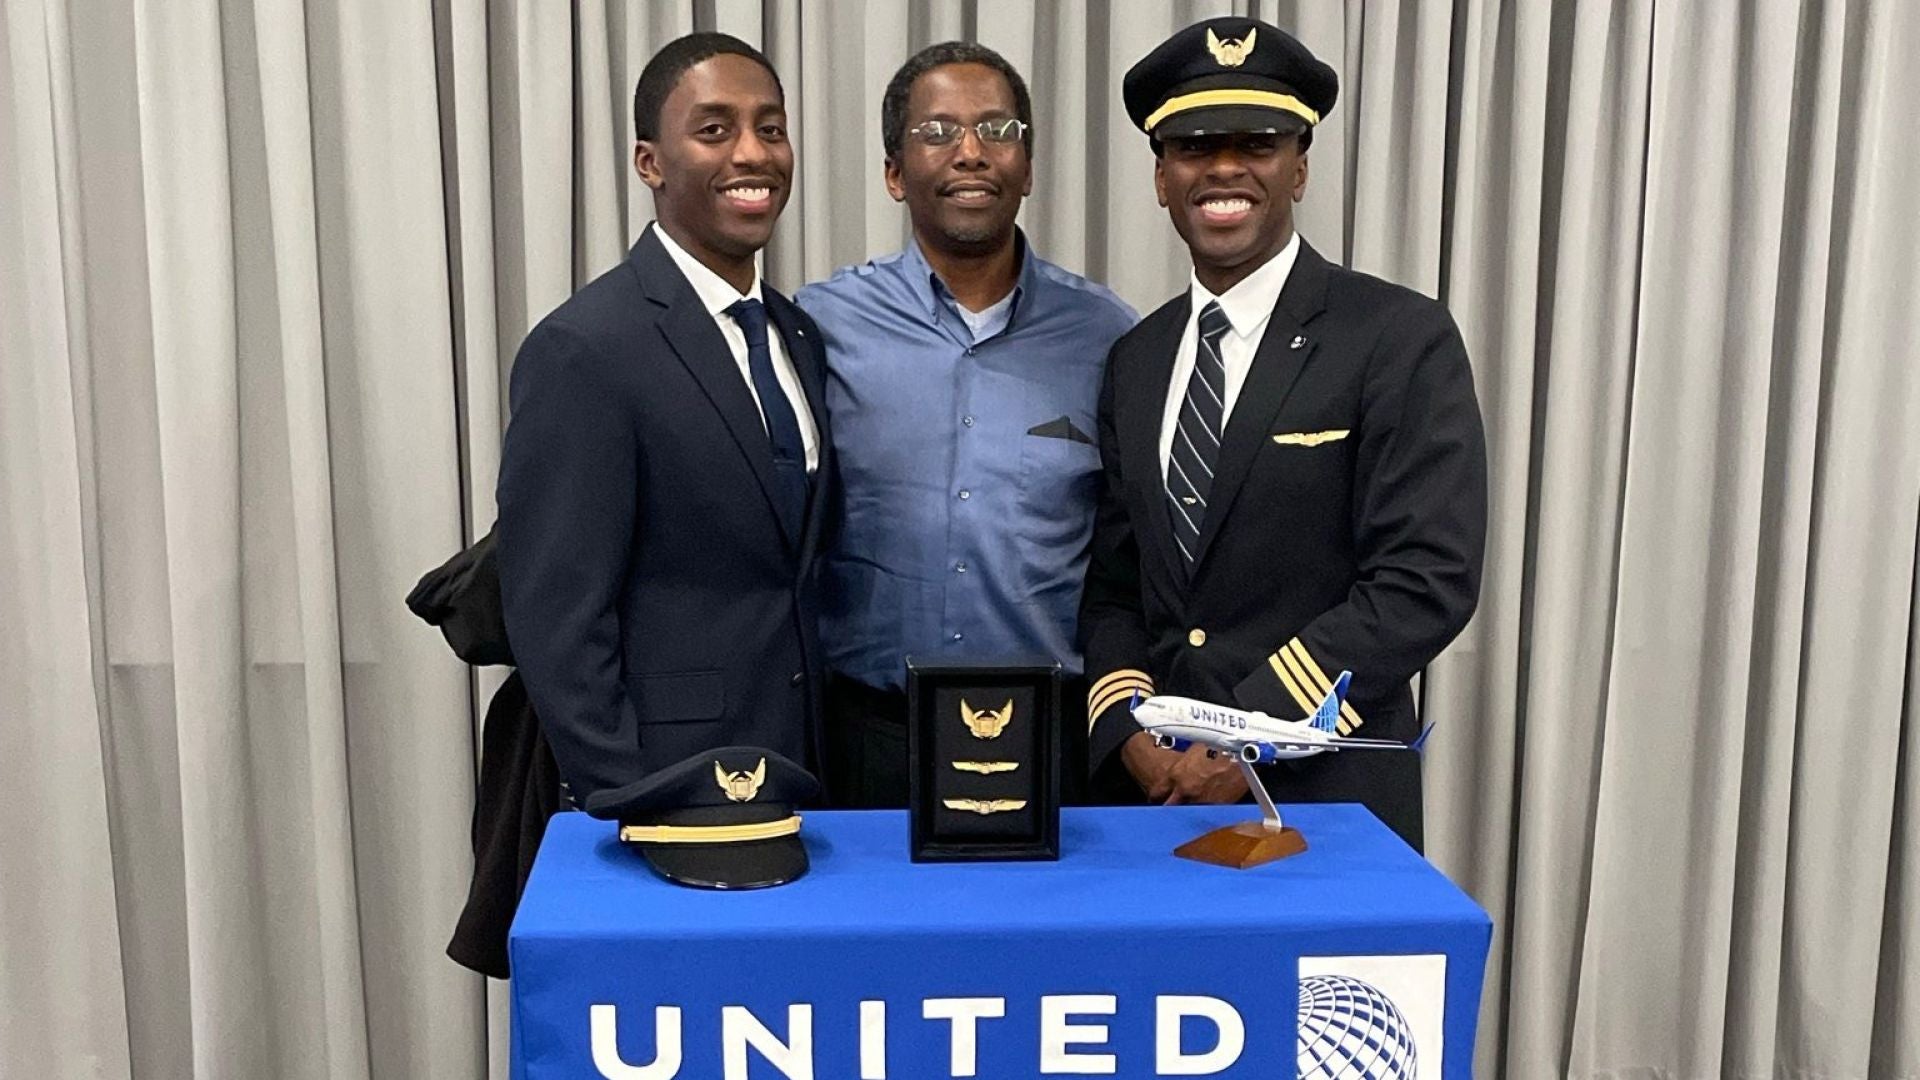 These Twin Brothers Are United Airlines Pilots. They Flew A Special Flight Home Together To Surprise Their Dad On Father's Day